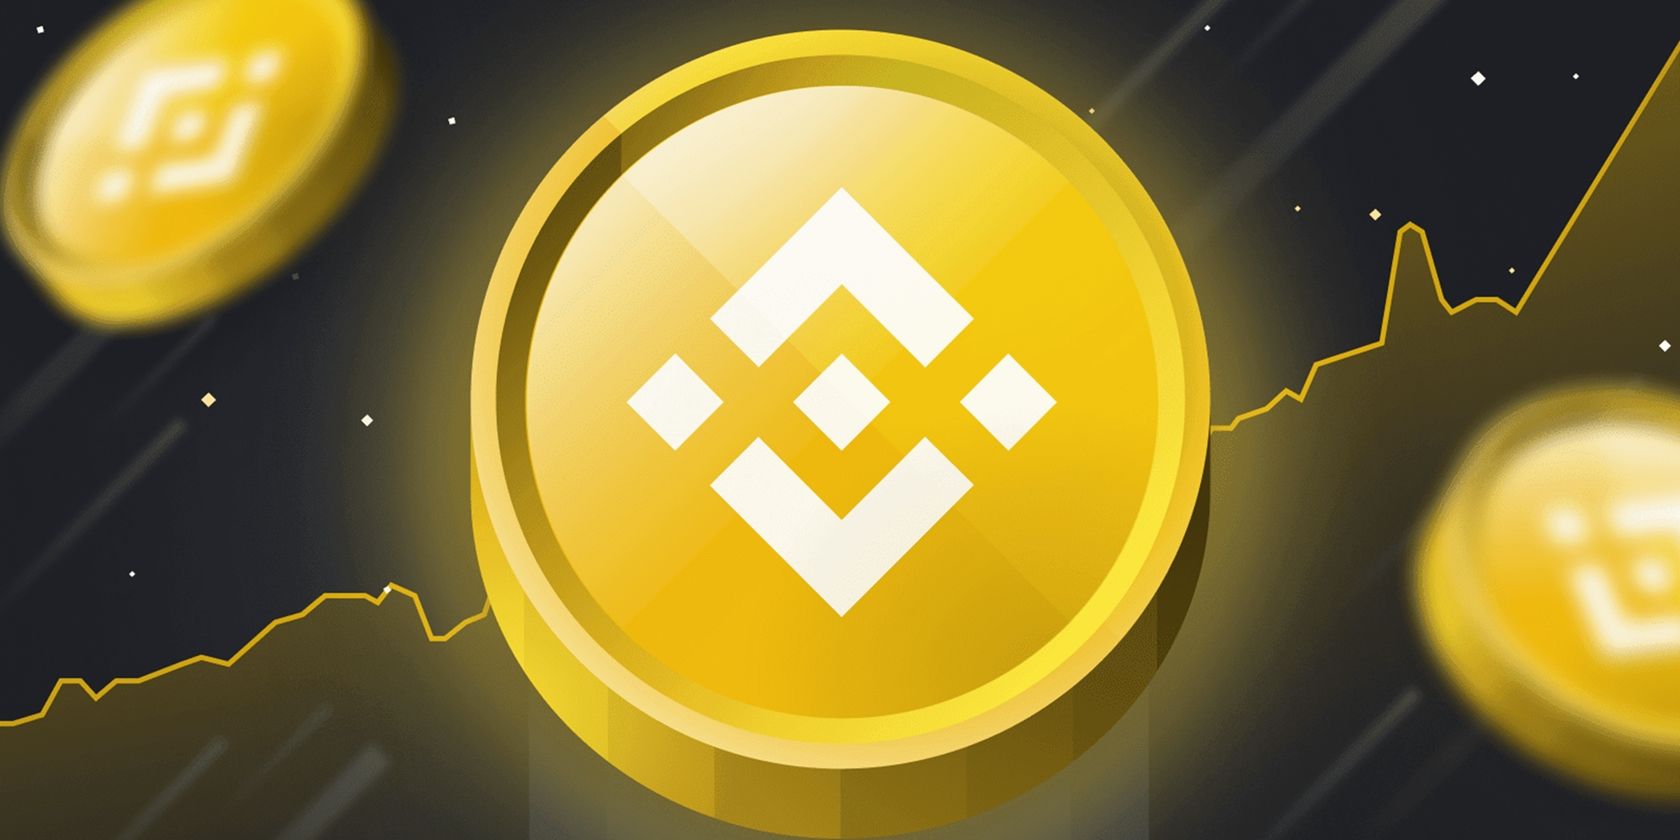 Buy Binance-Coin (BNB) - Step by step guide for buying BNB | Ledger